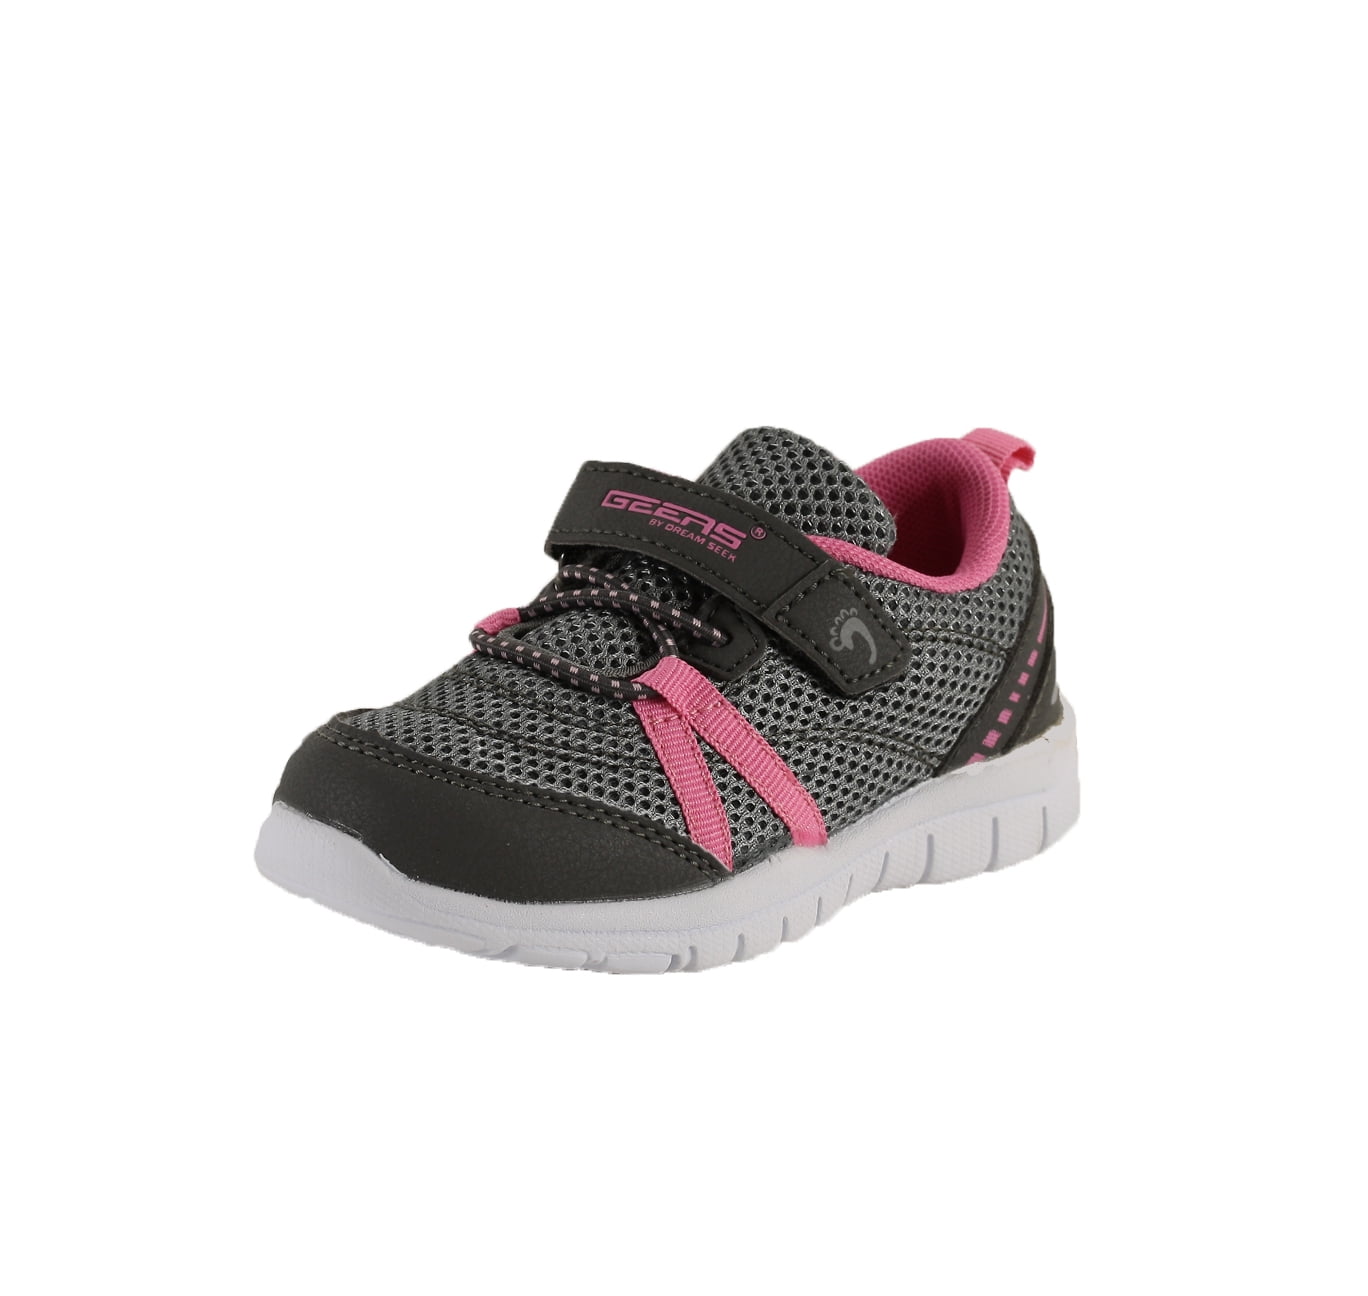 Geers Girls Toddler 1345 Velcro Strap Casual Fashion Sneaker (5 M US ...